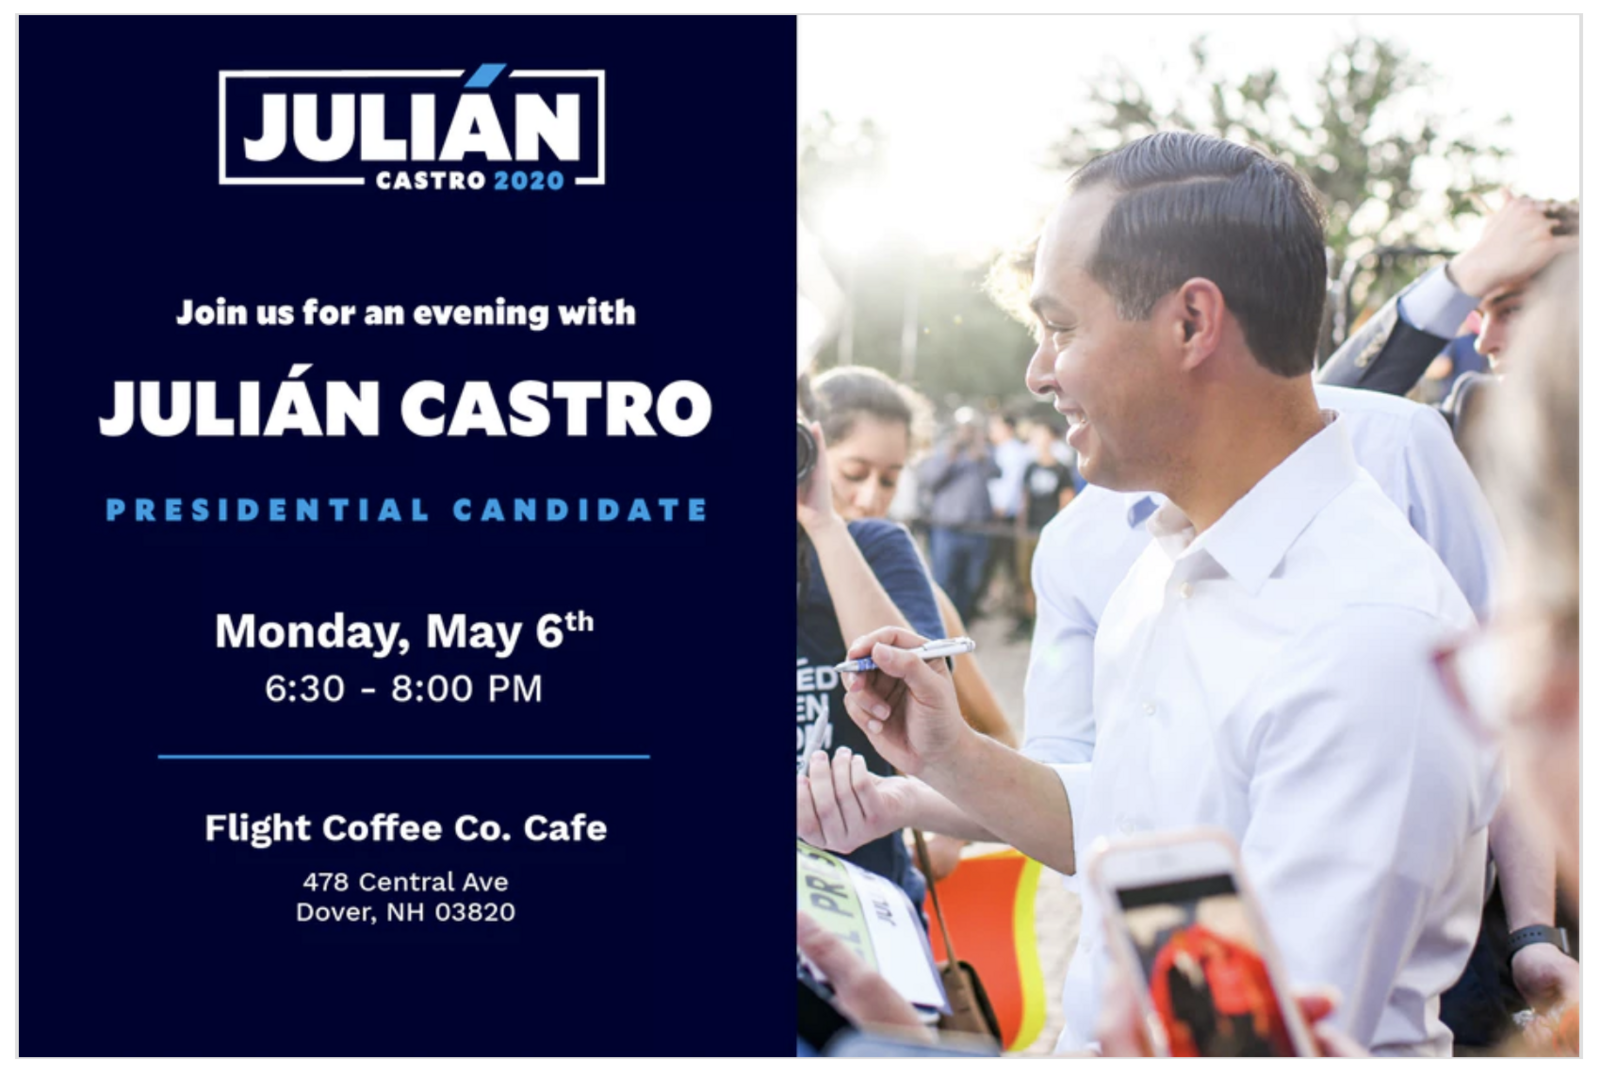 Julian Castro event flyer with photo